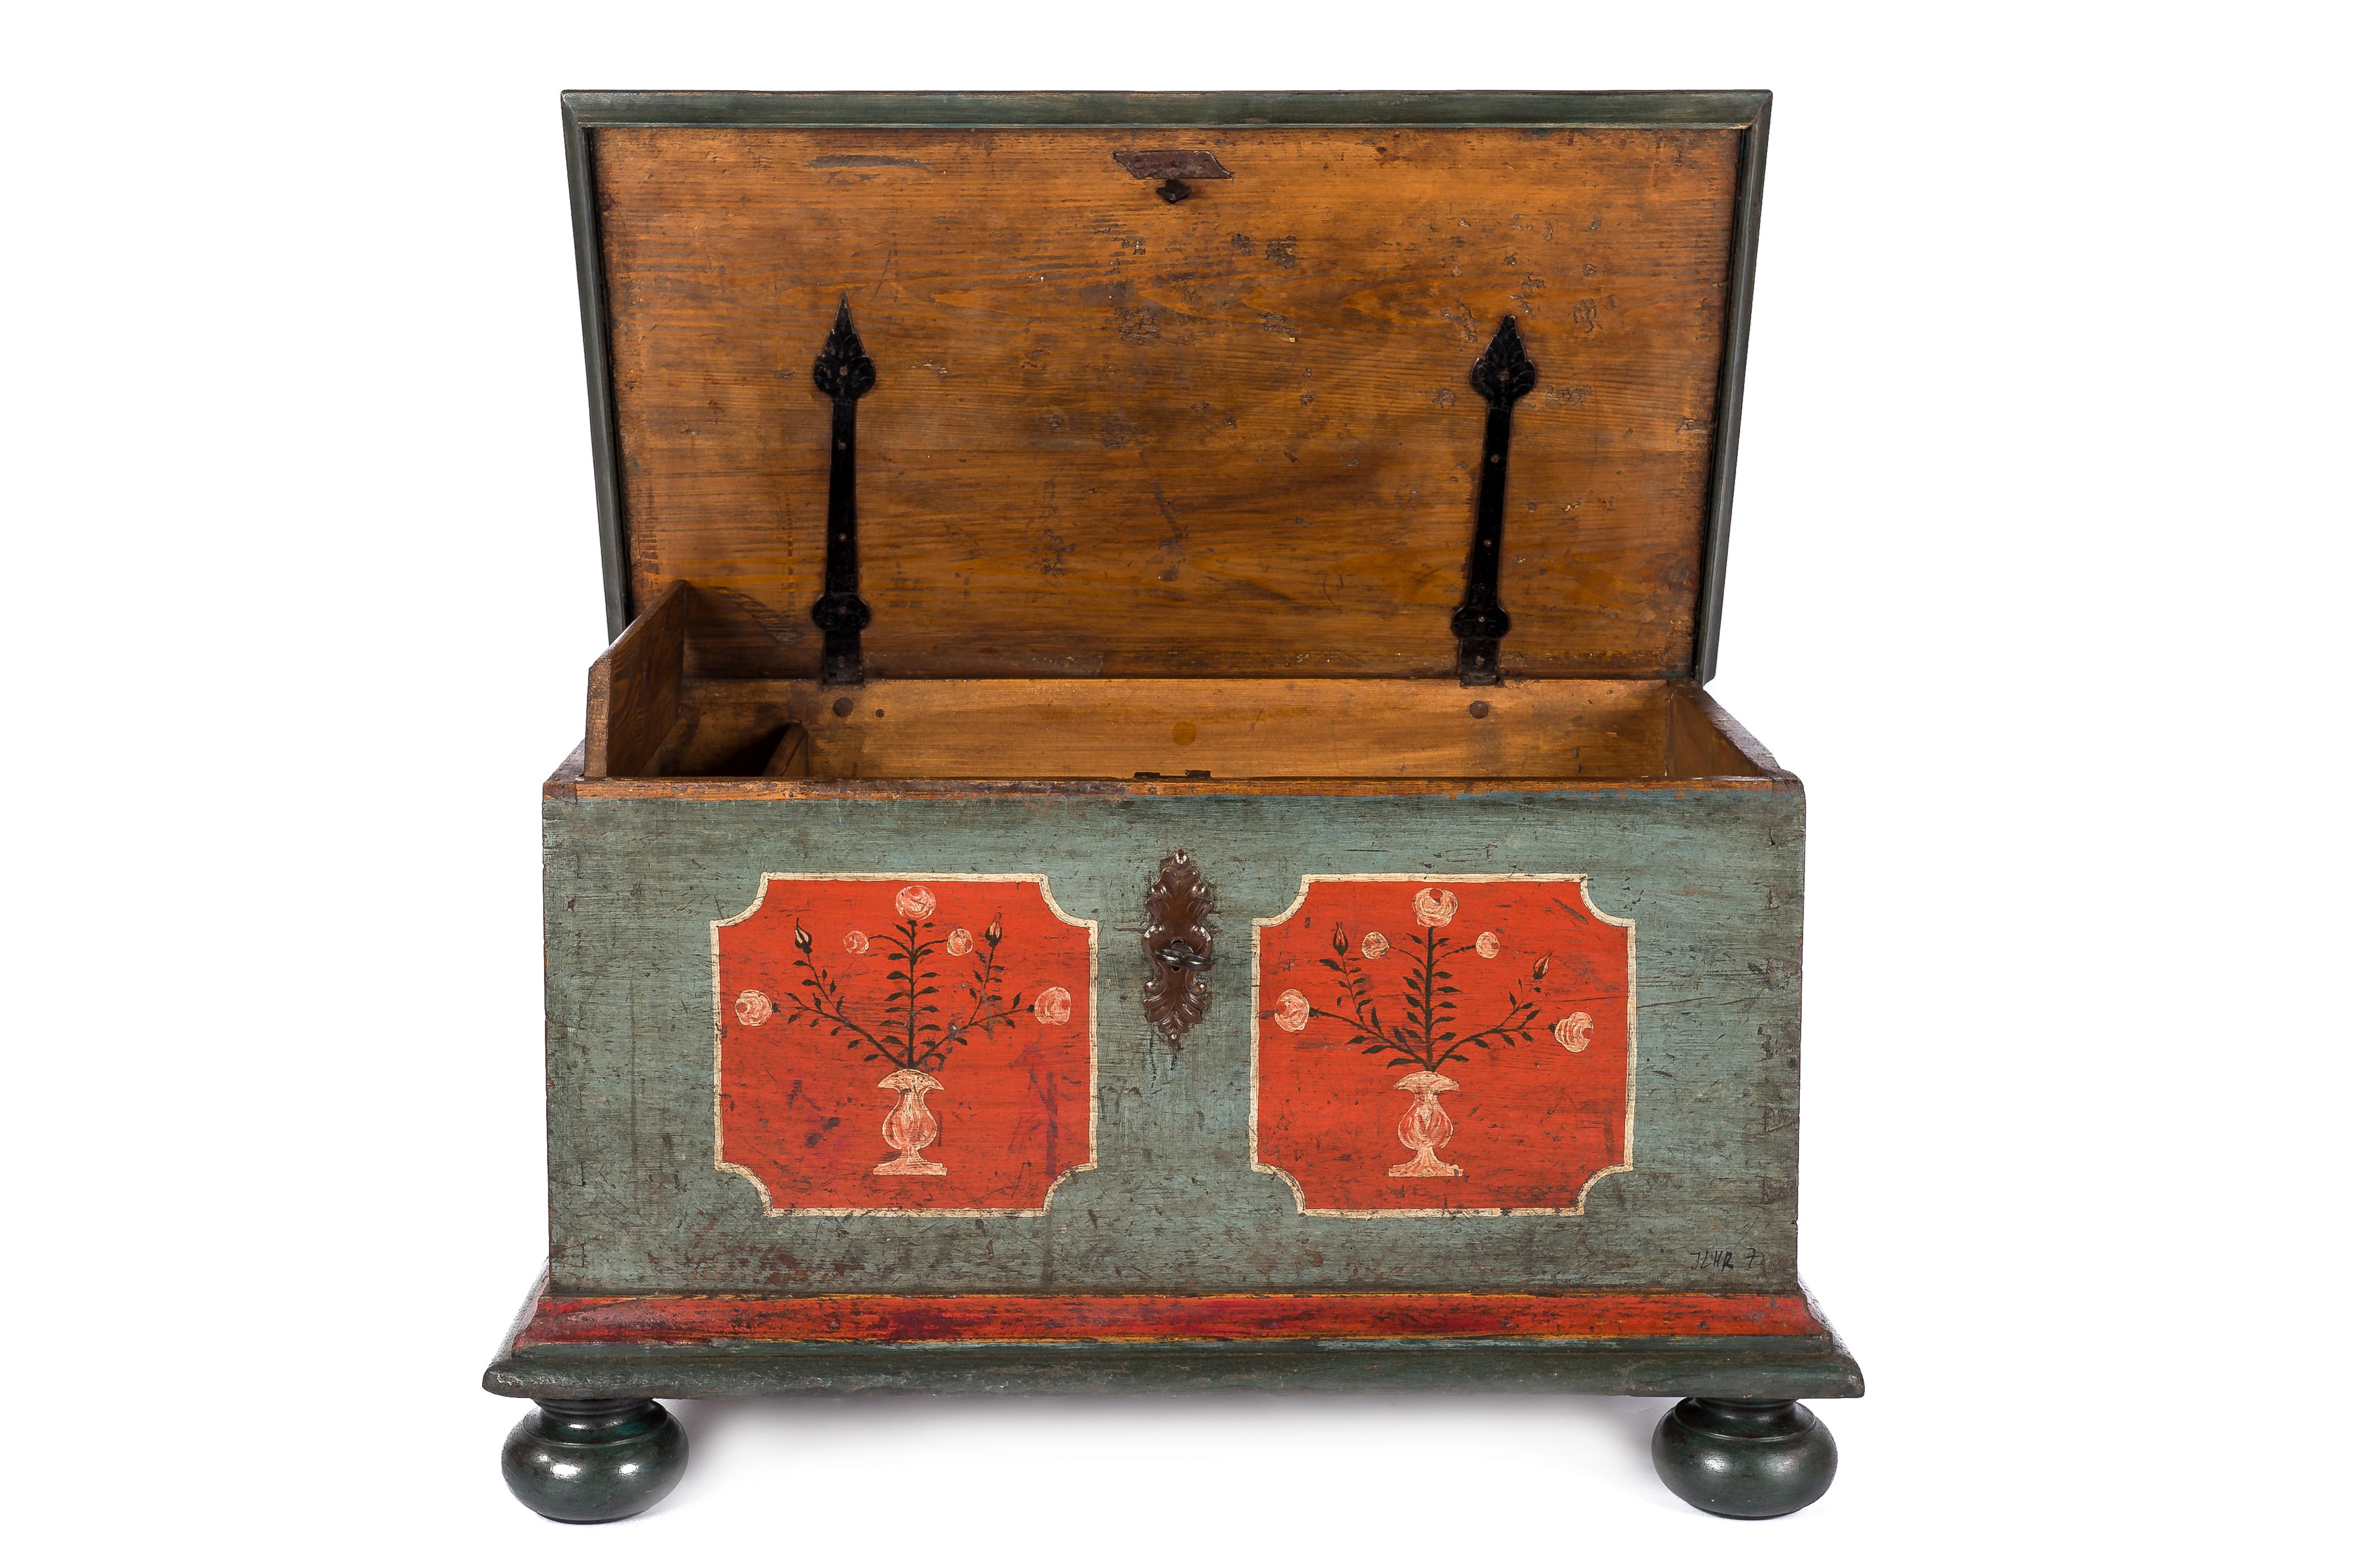 18th Century 18th-Century Solid Pine and Traditional Painted Rural Bohemian Trunk or Chest